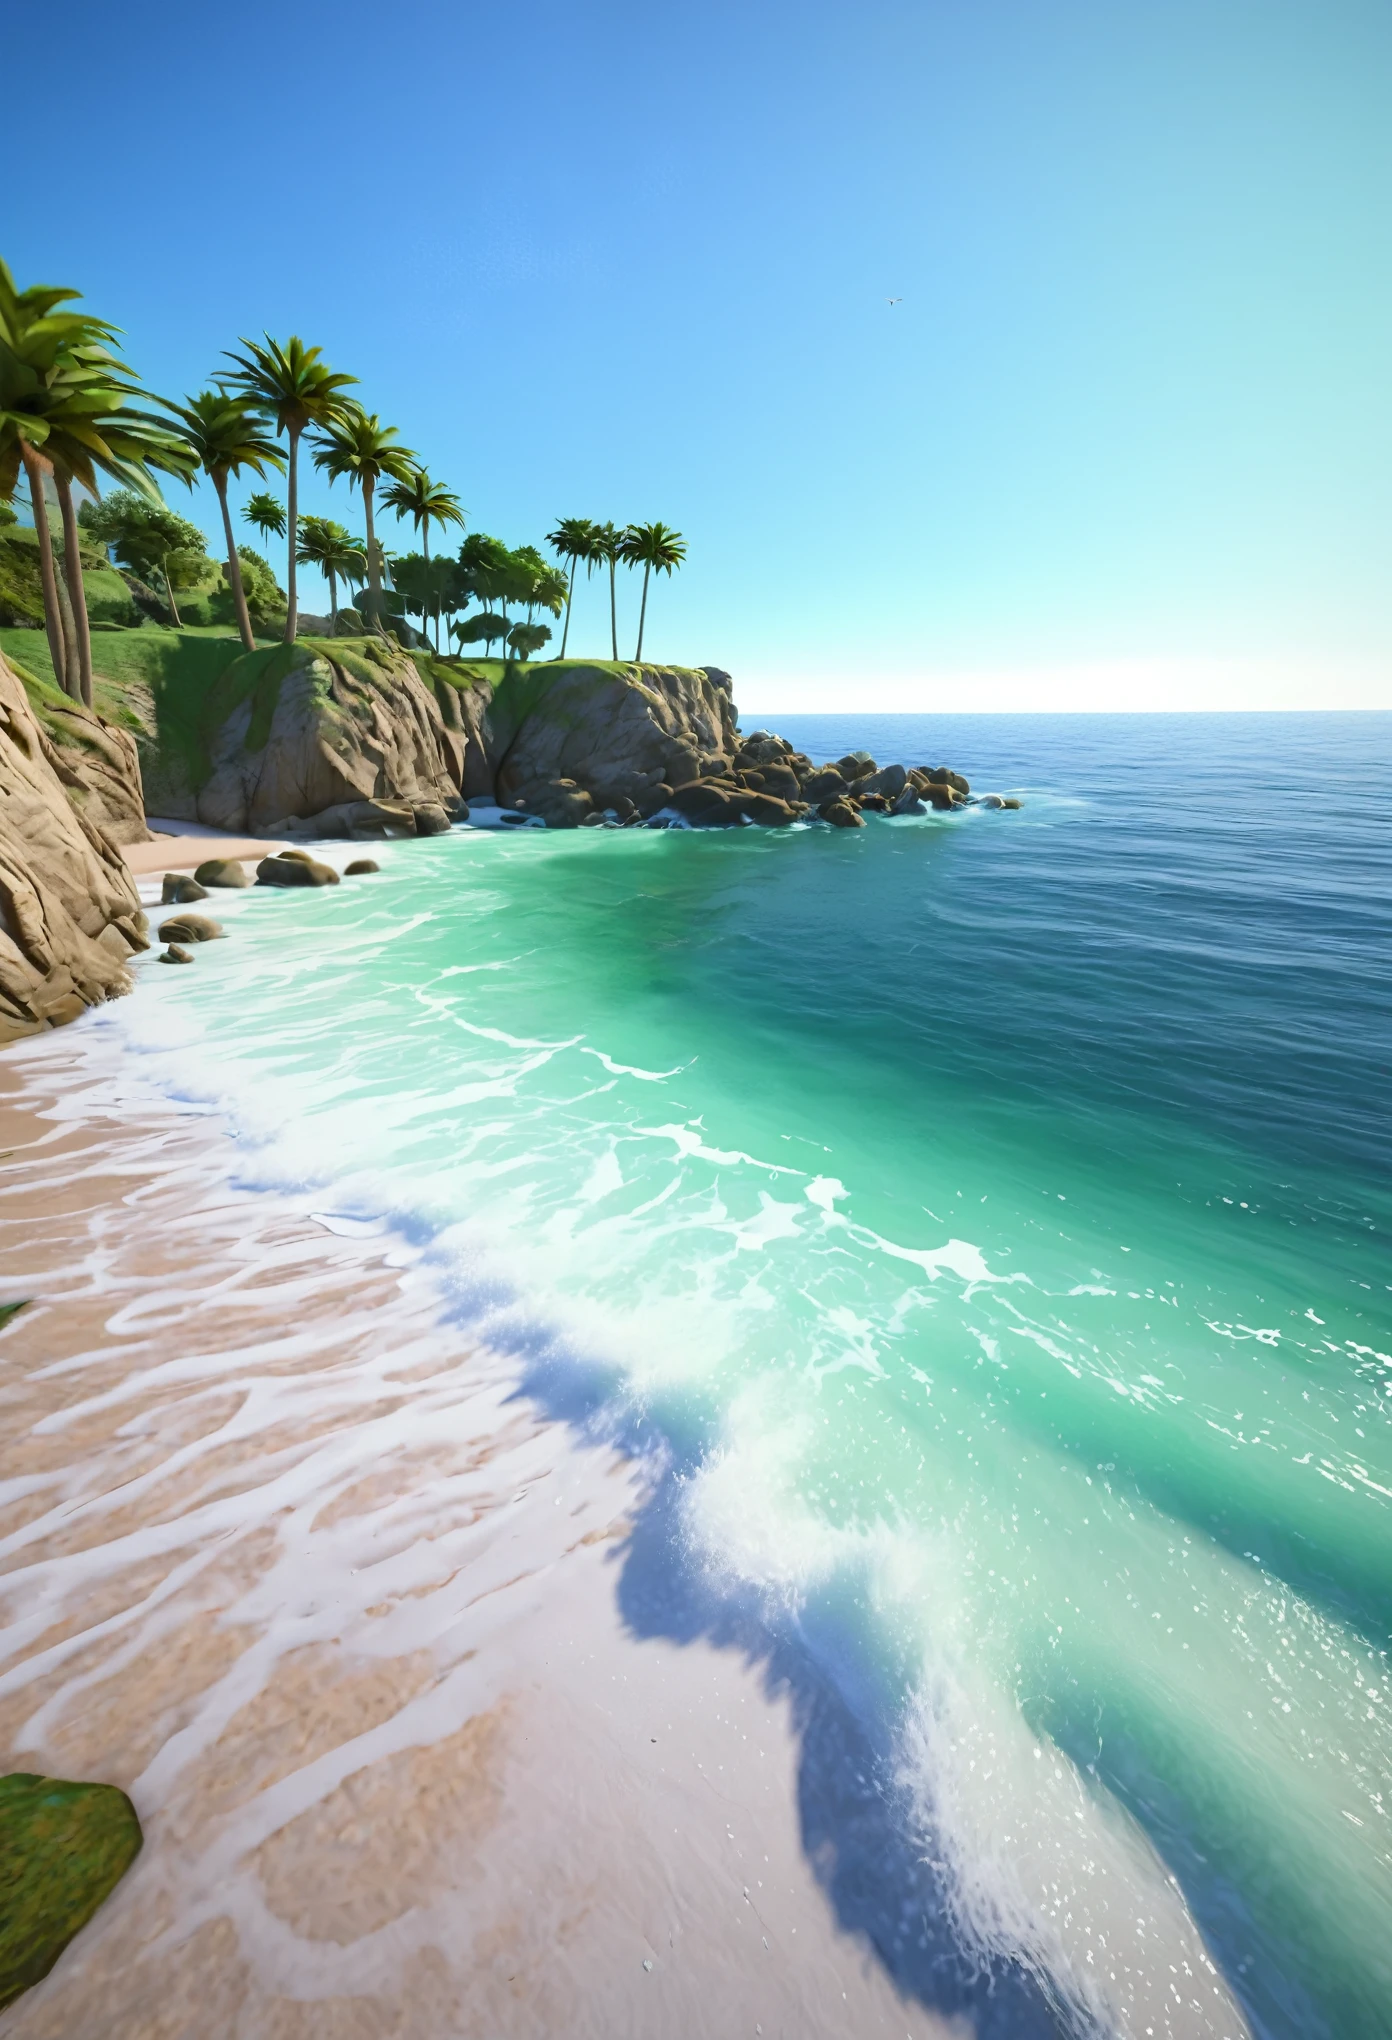 best quality,4k,8k,highres,masterpiece:1.2,ultra-detailed,realistic,photorealistic,landscape,blue coast,ocean waves,rocky cliffs,seagulls,calm and serene atmosphere,sunlight reflecting on the water,soft sandy beach,gentle breeze,peaceful and tranquil,turquoise water,green palm trees,cloudless sky,smooth brushwork,color harmony,subtle color variations,natural lighting,gentle waves lapping at the shore,beautiful coastline,secluded cove,splashing foam,clear horizon,vivid colors,realistic textures,harmonious composition,soft hues,serene ambiance,impressionistic style,relaxing and soothing,coastal escape,fine art,ethereal setting